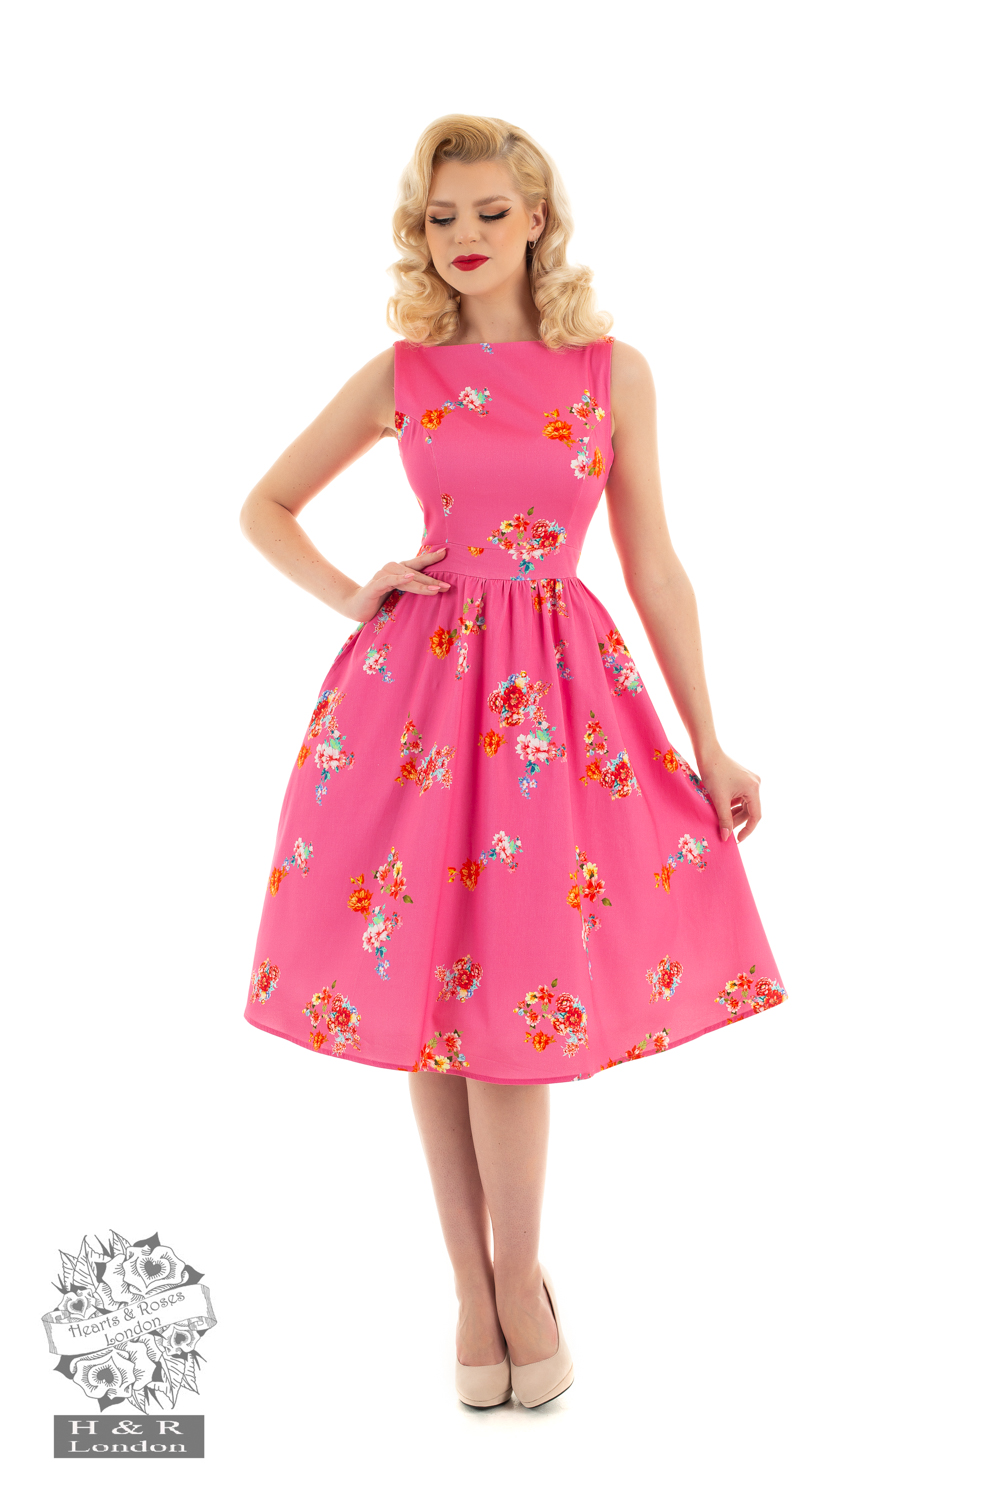 Polly Floral Swing Dress